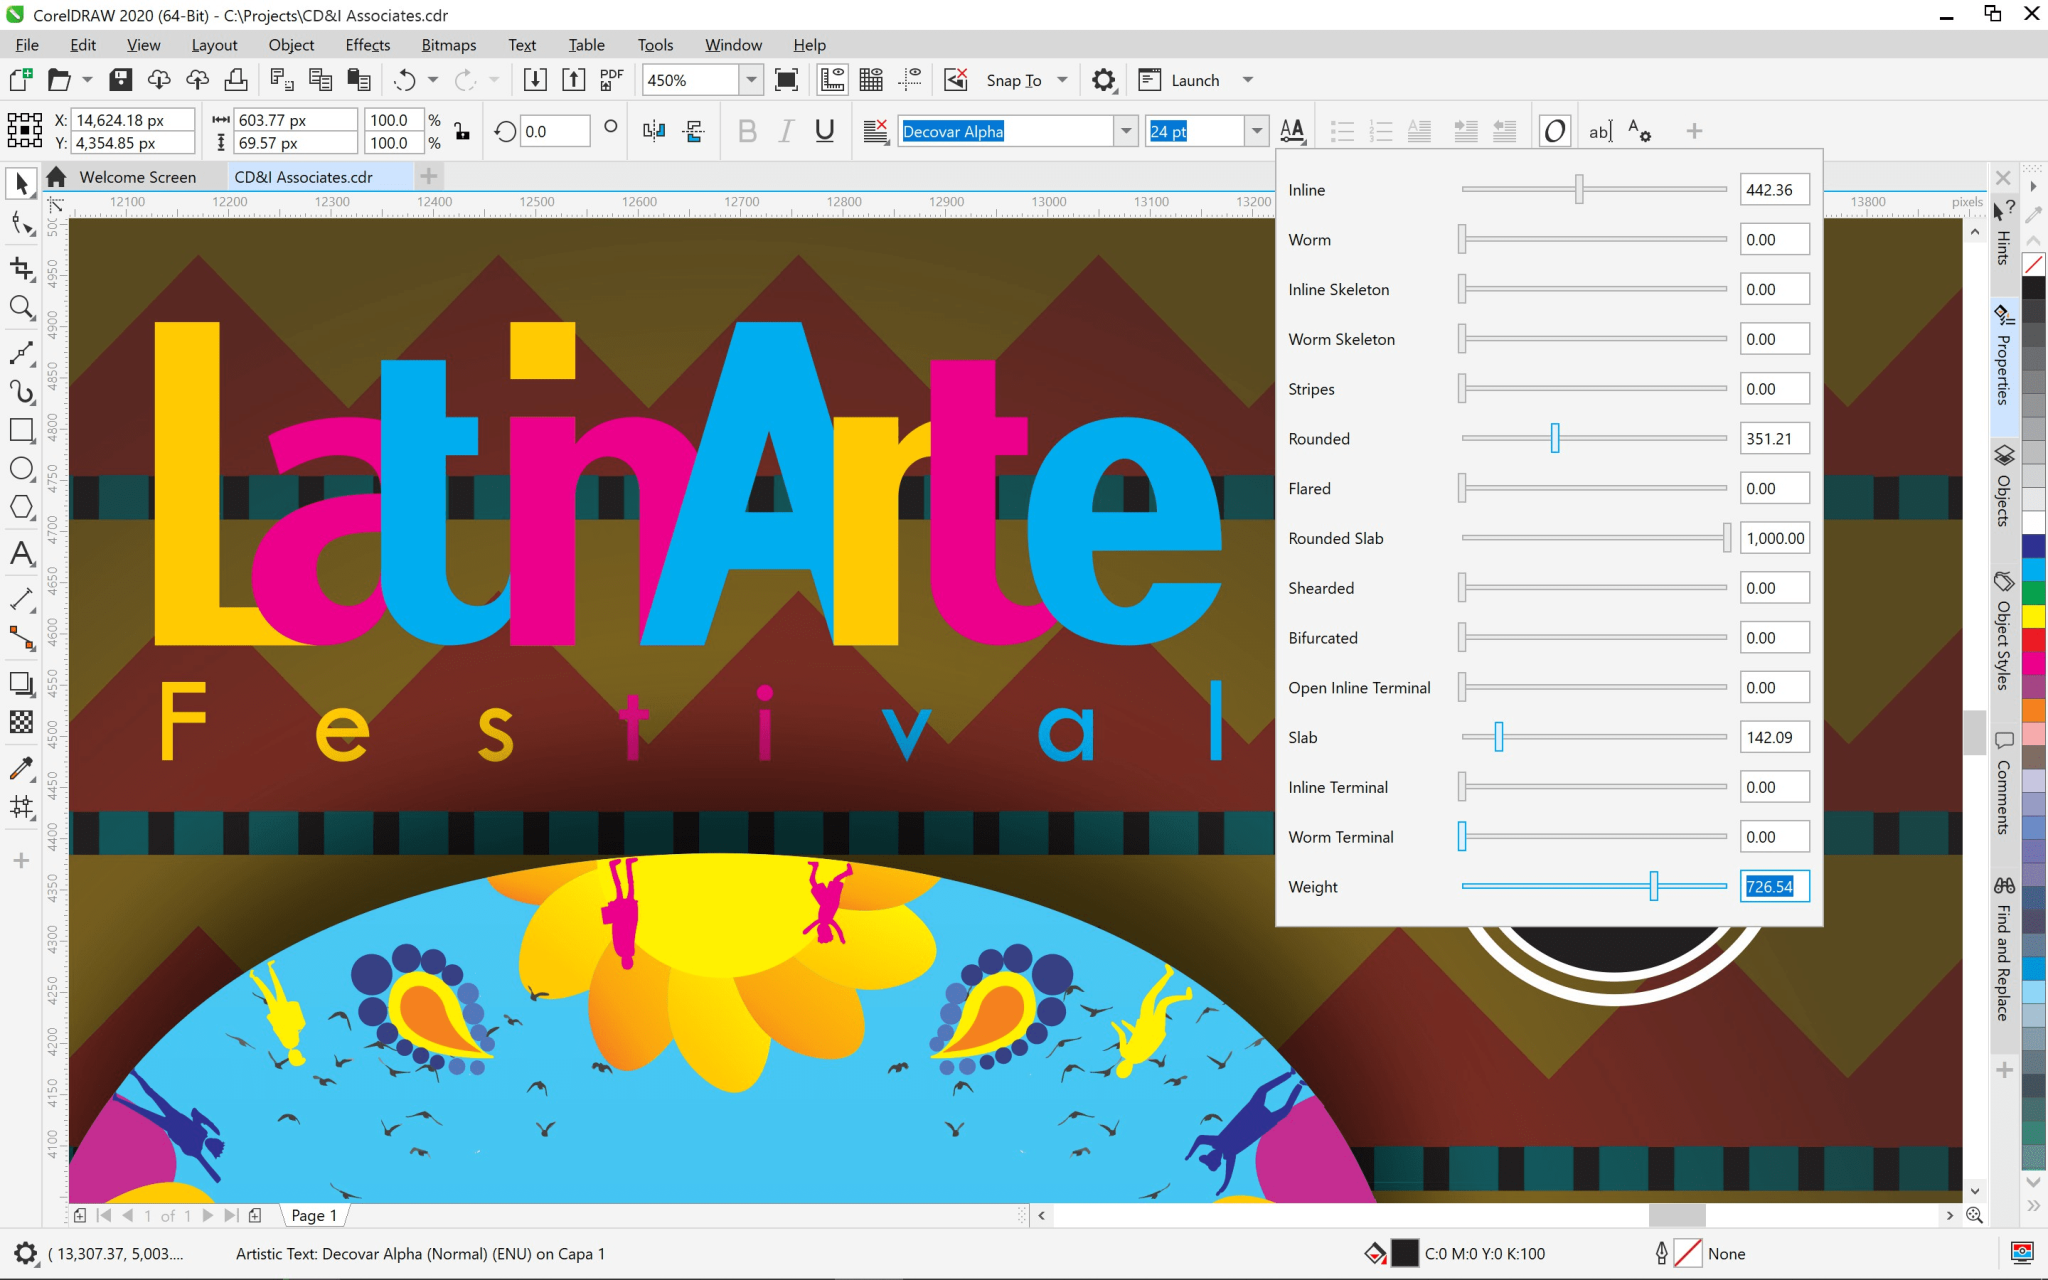 coreldraw 2020 free download full version with crack